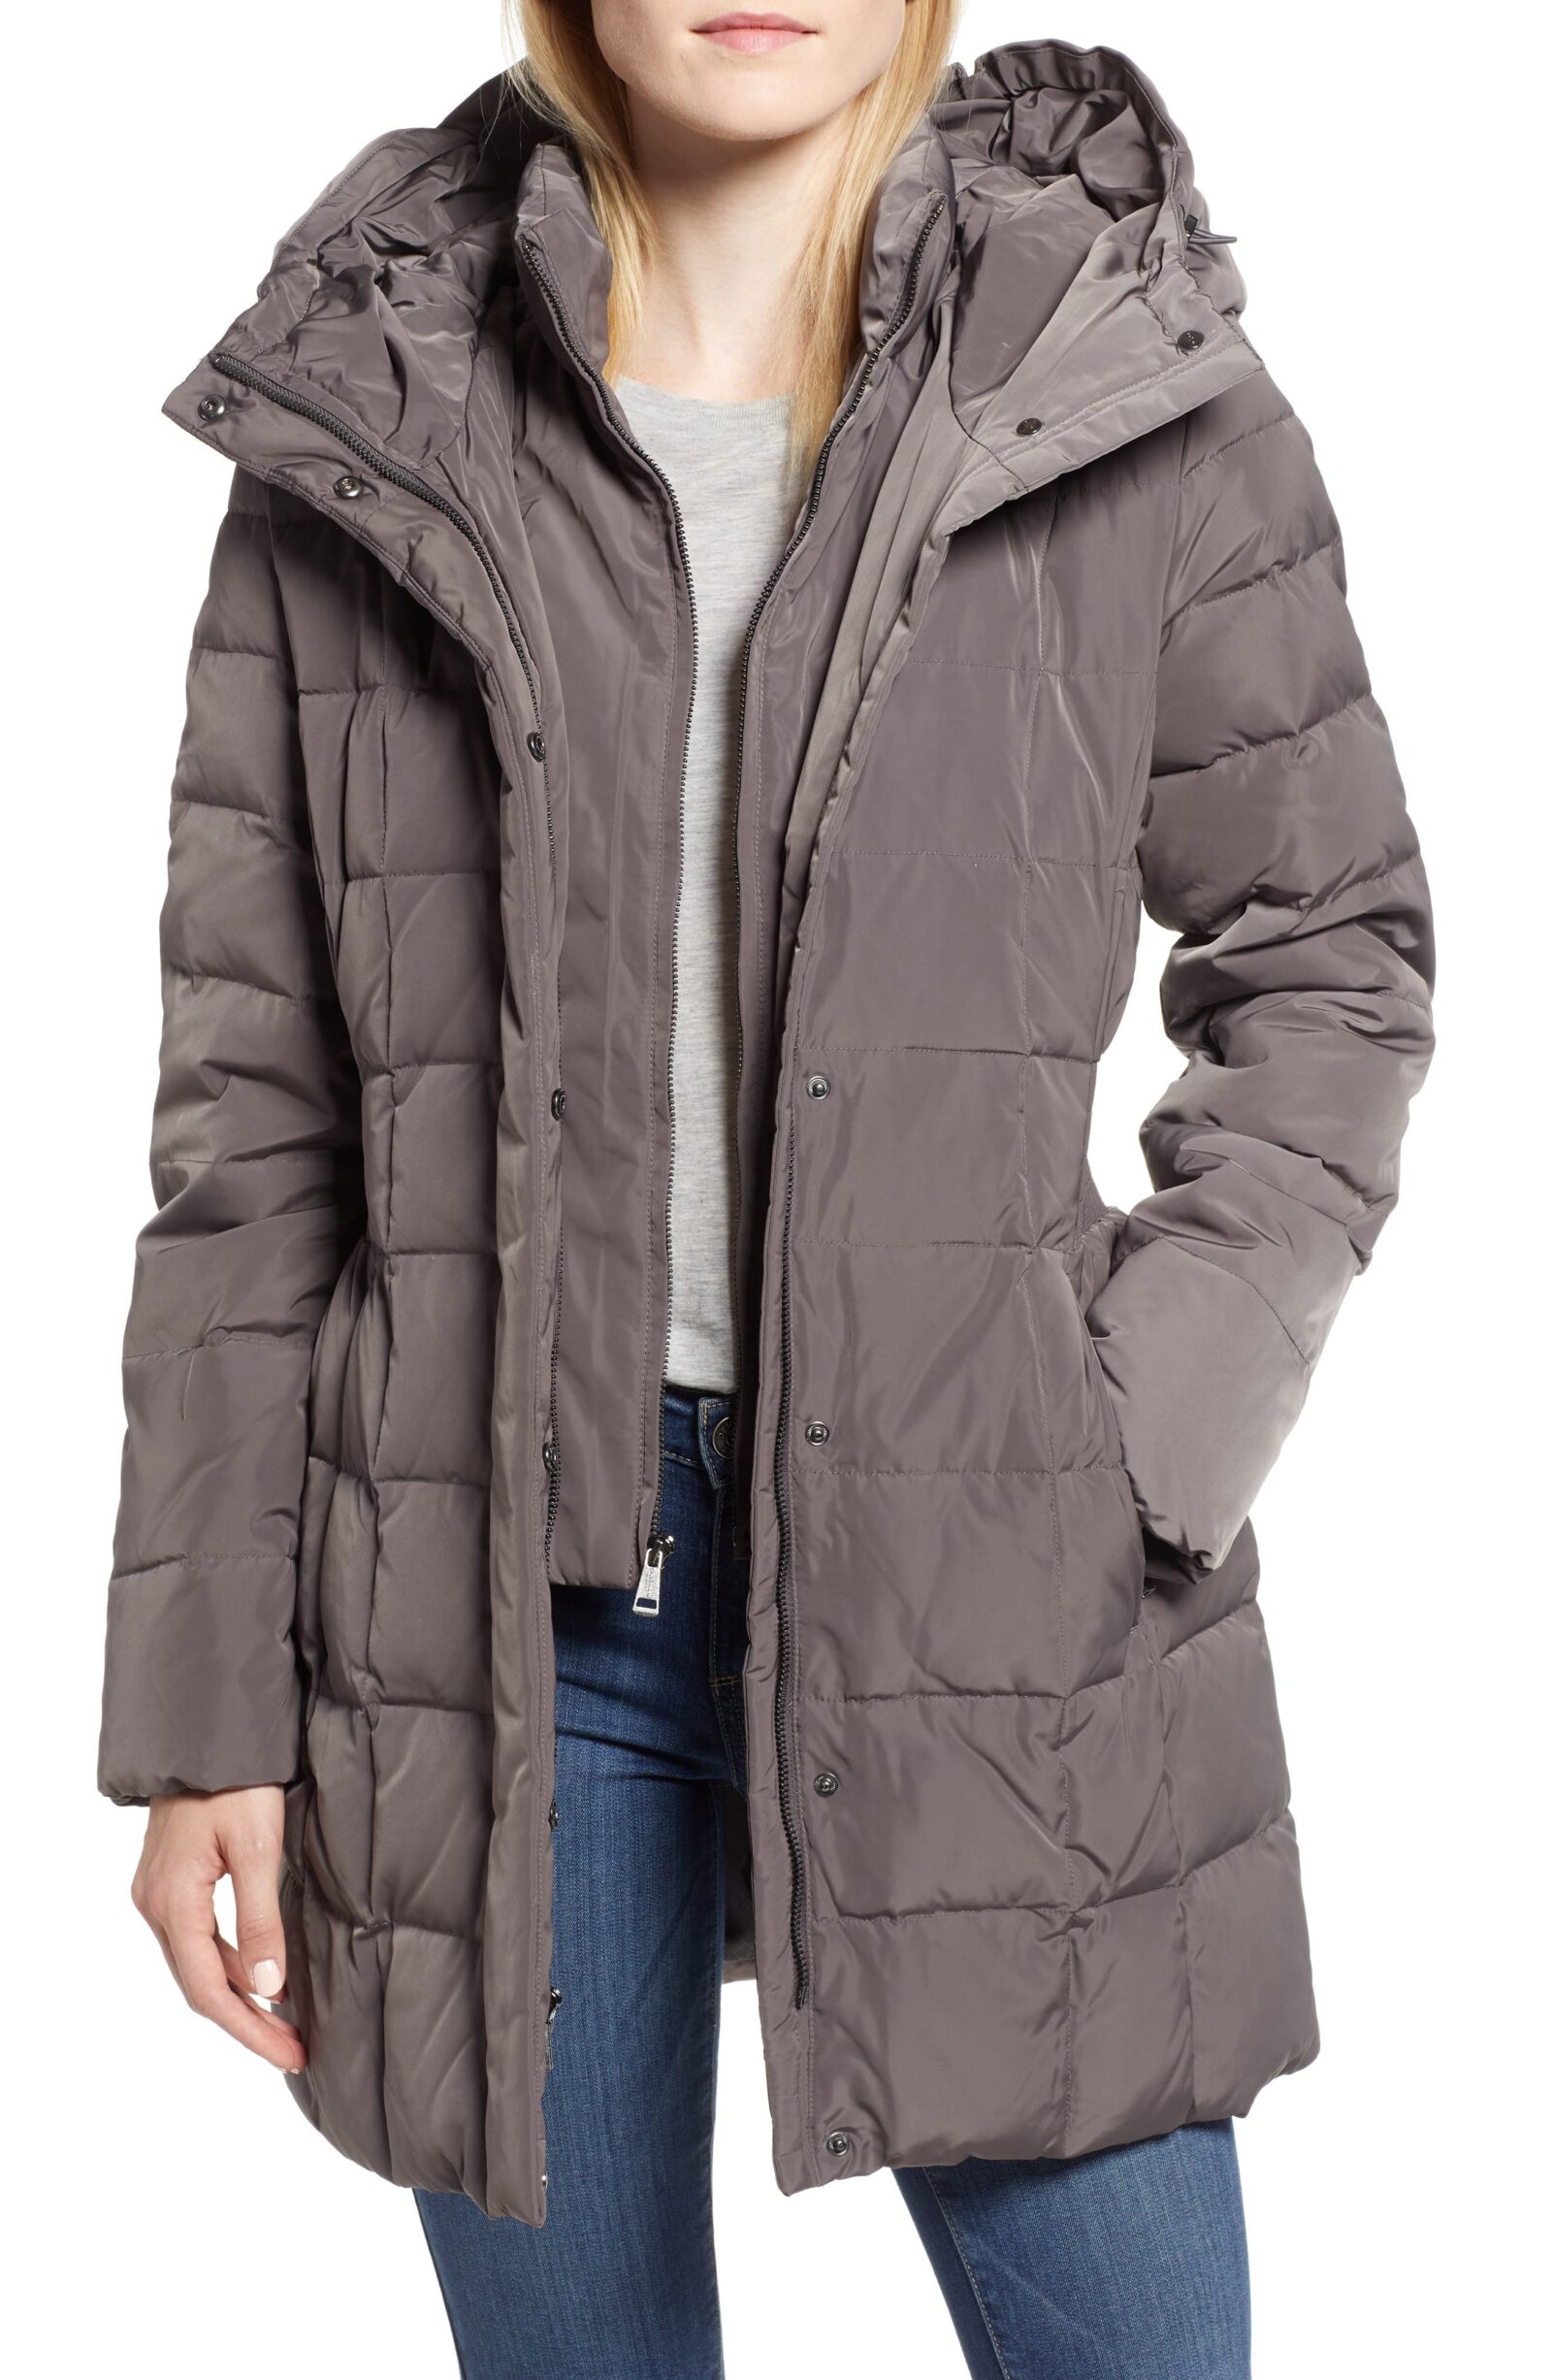 These Coats & Jackets On Sale At Unbeatable Prices At Nordstrom Are ...